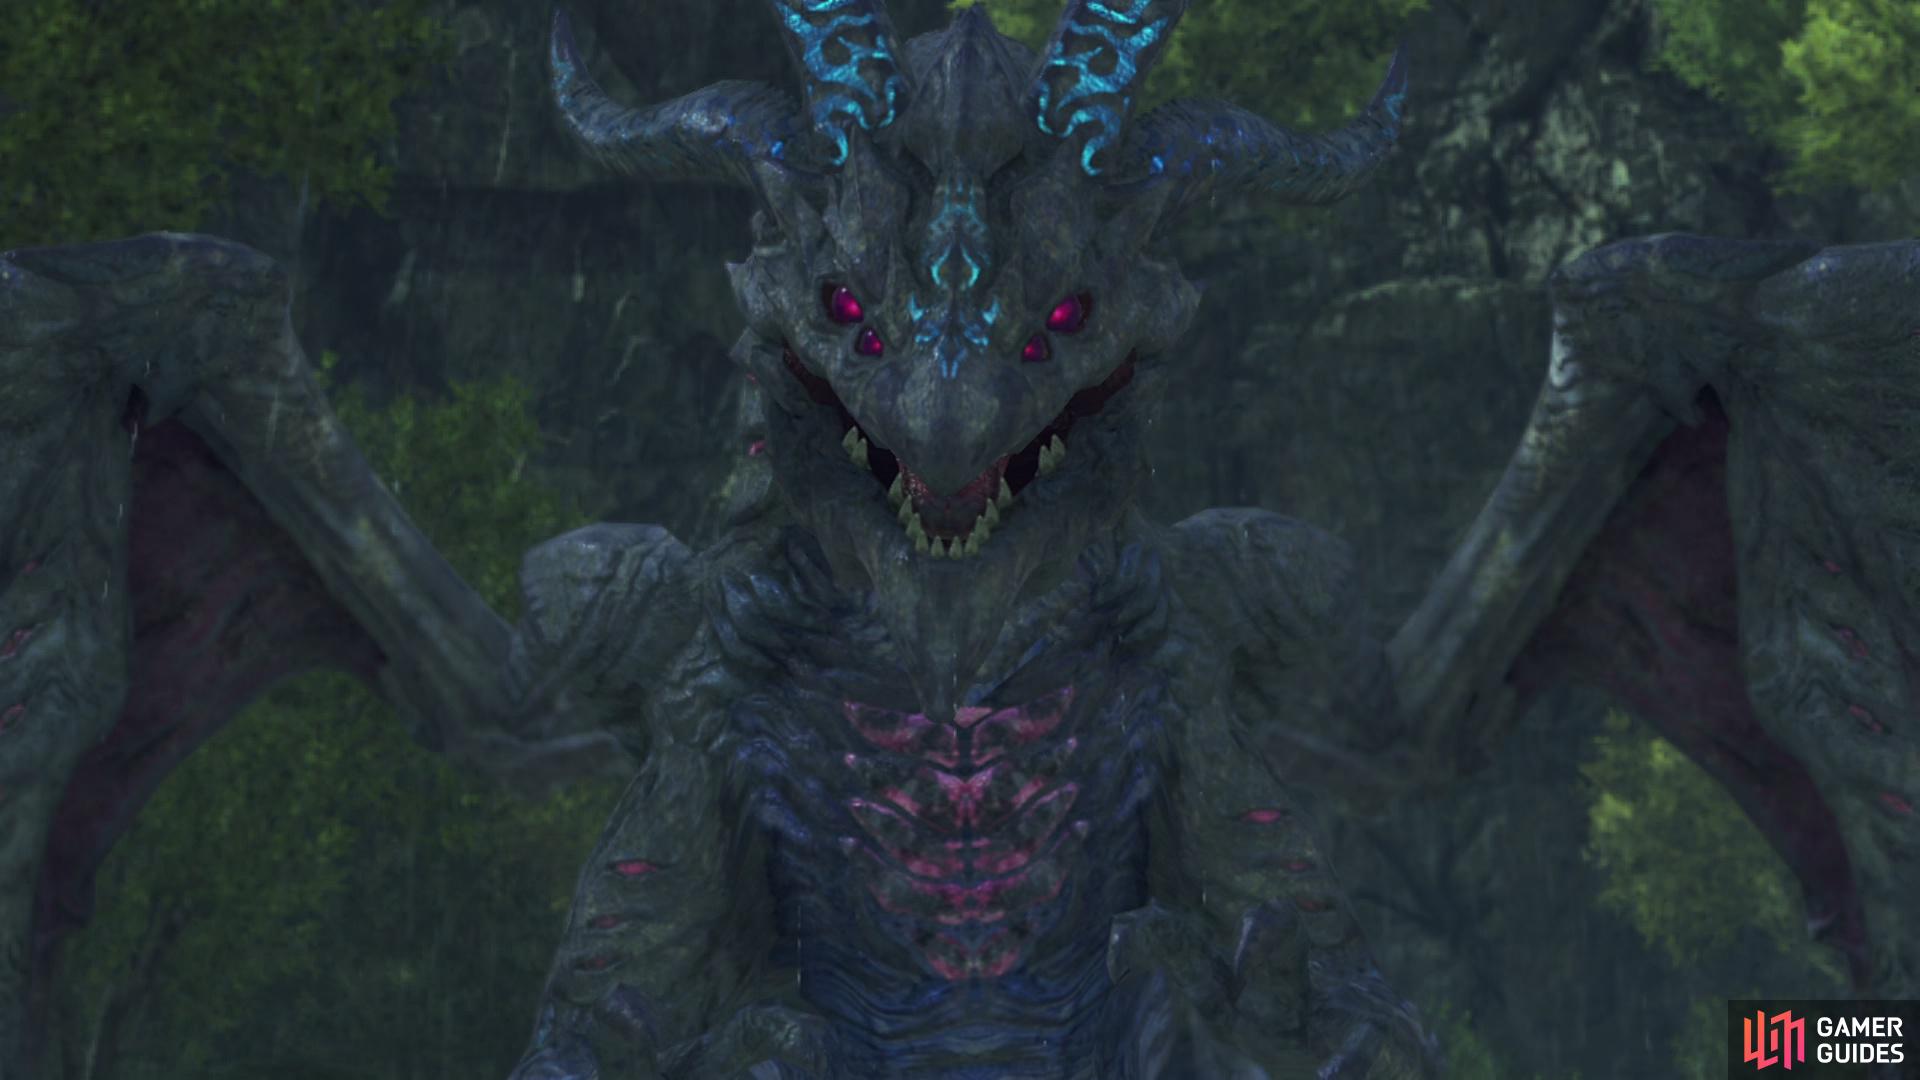 The Umber Drague is the first boss of Chapter 4 in Xenoblade Chronicles 3.